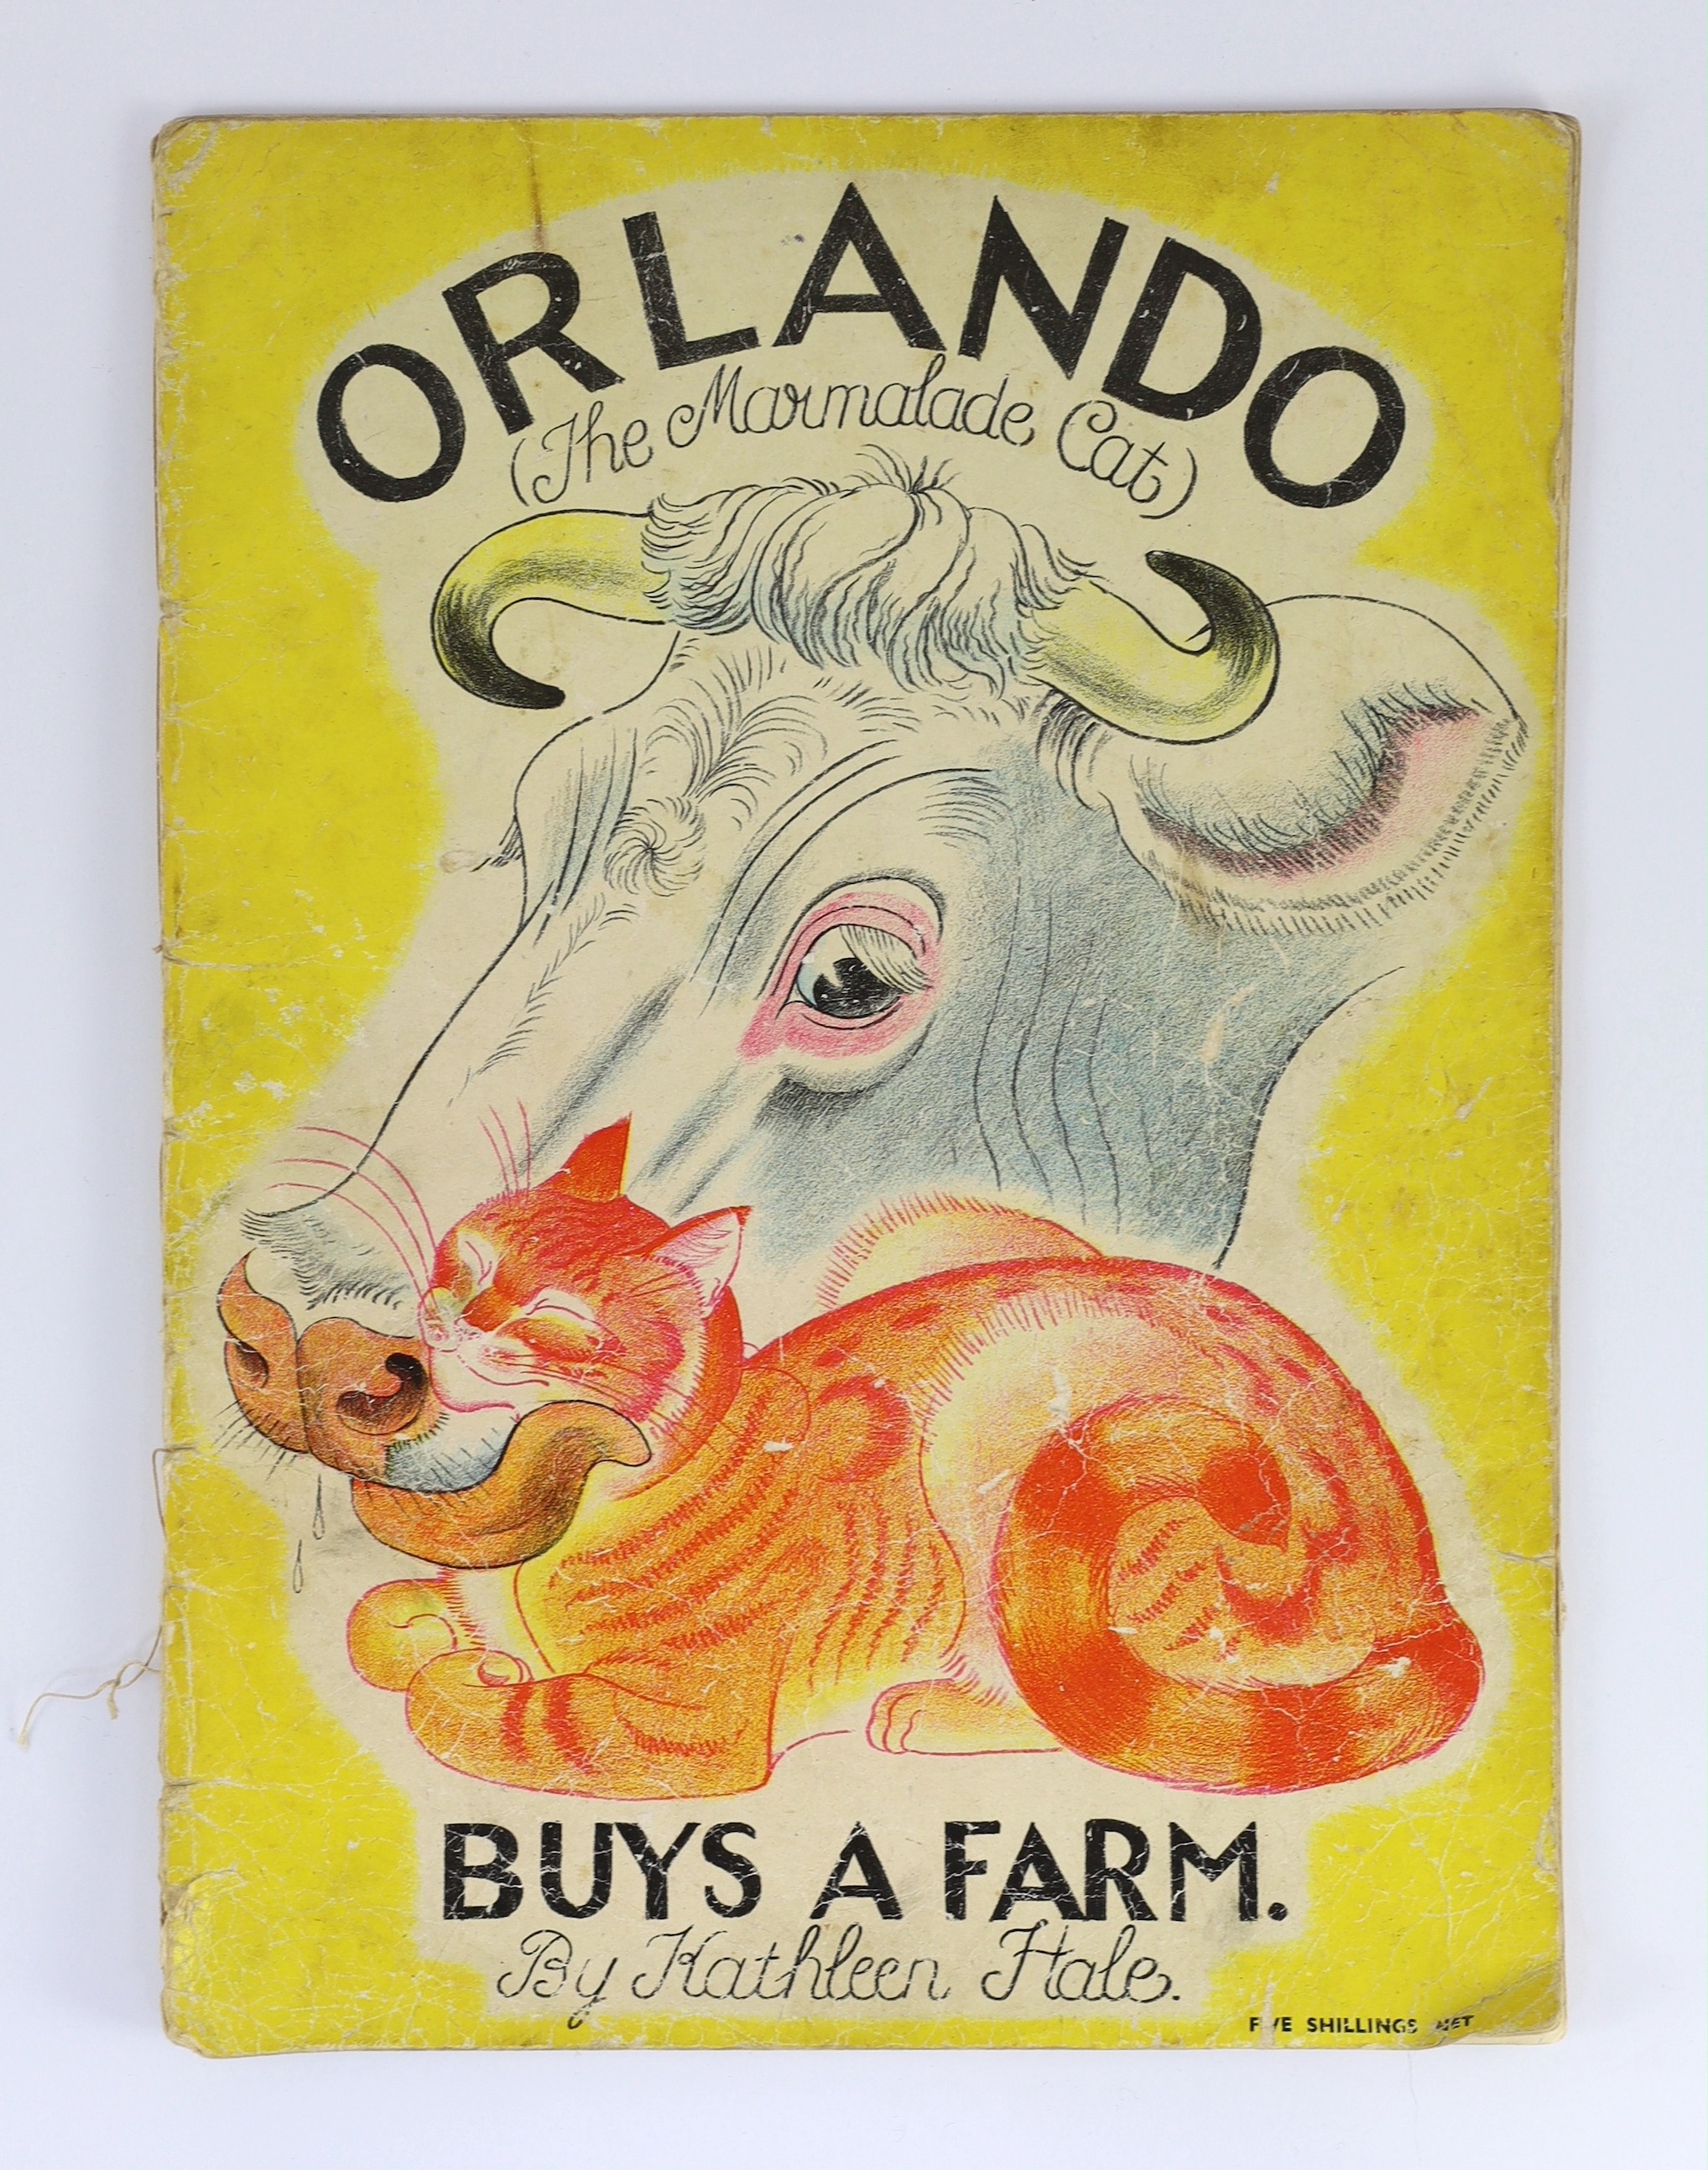 Hale, Kathleen - Orlando ... Buys a Farm. First edition, Country Life & NY., Transatlantic Arts, 1942; (Same Author) - Orlando ... A Camping Holiday. Country Life & NY., Charles Scribner's Sons